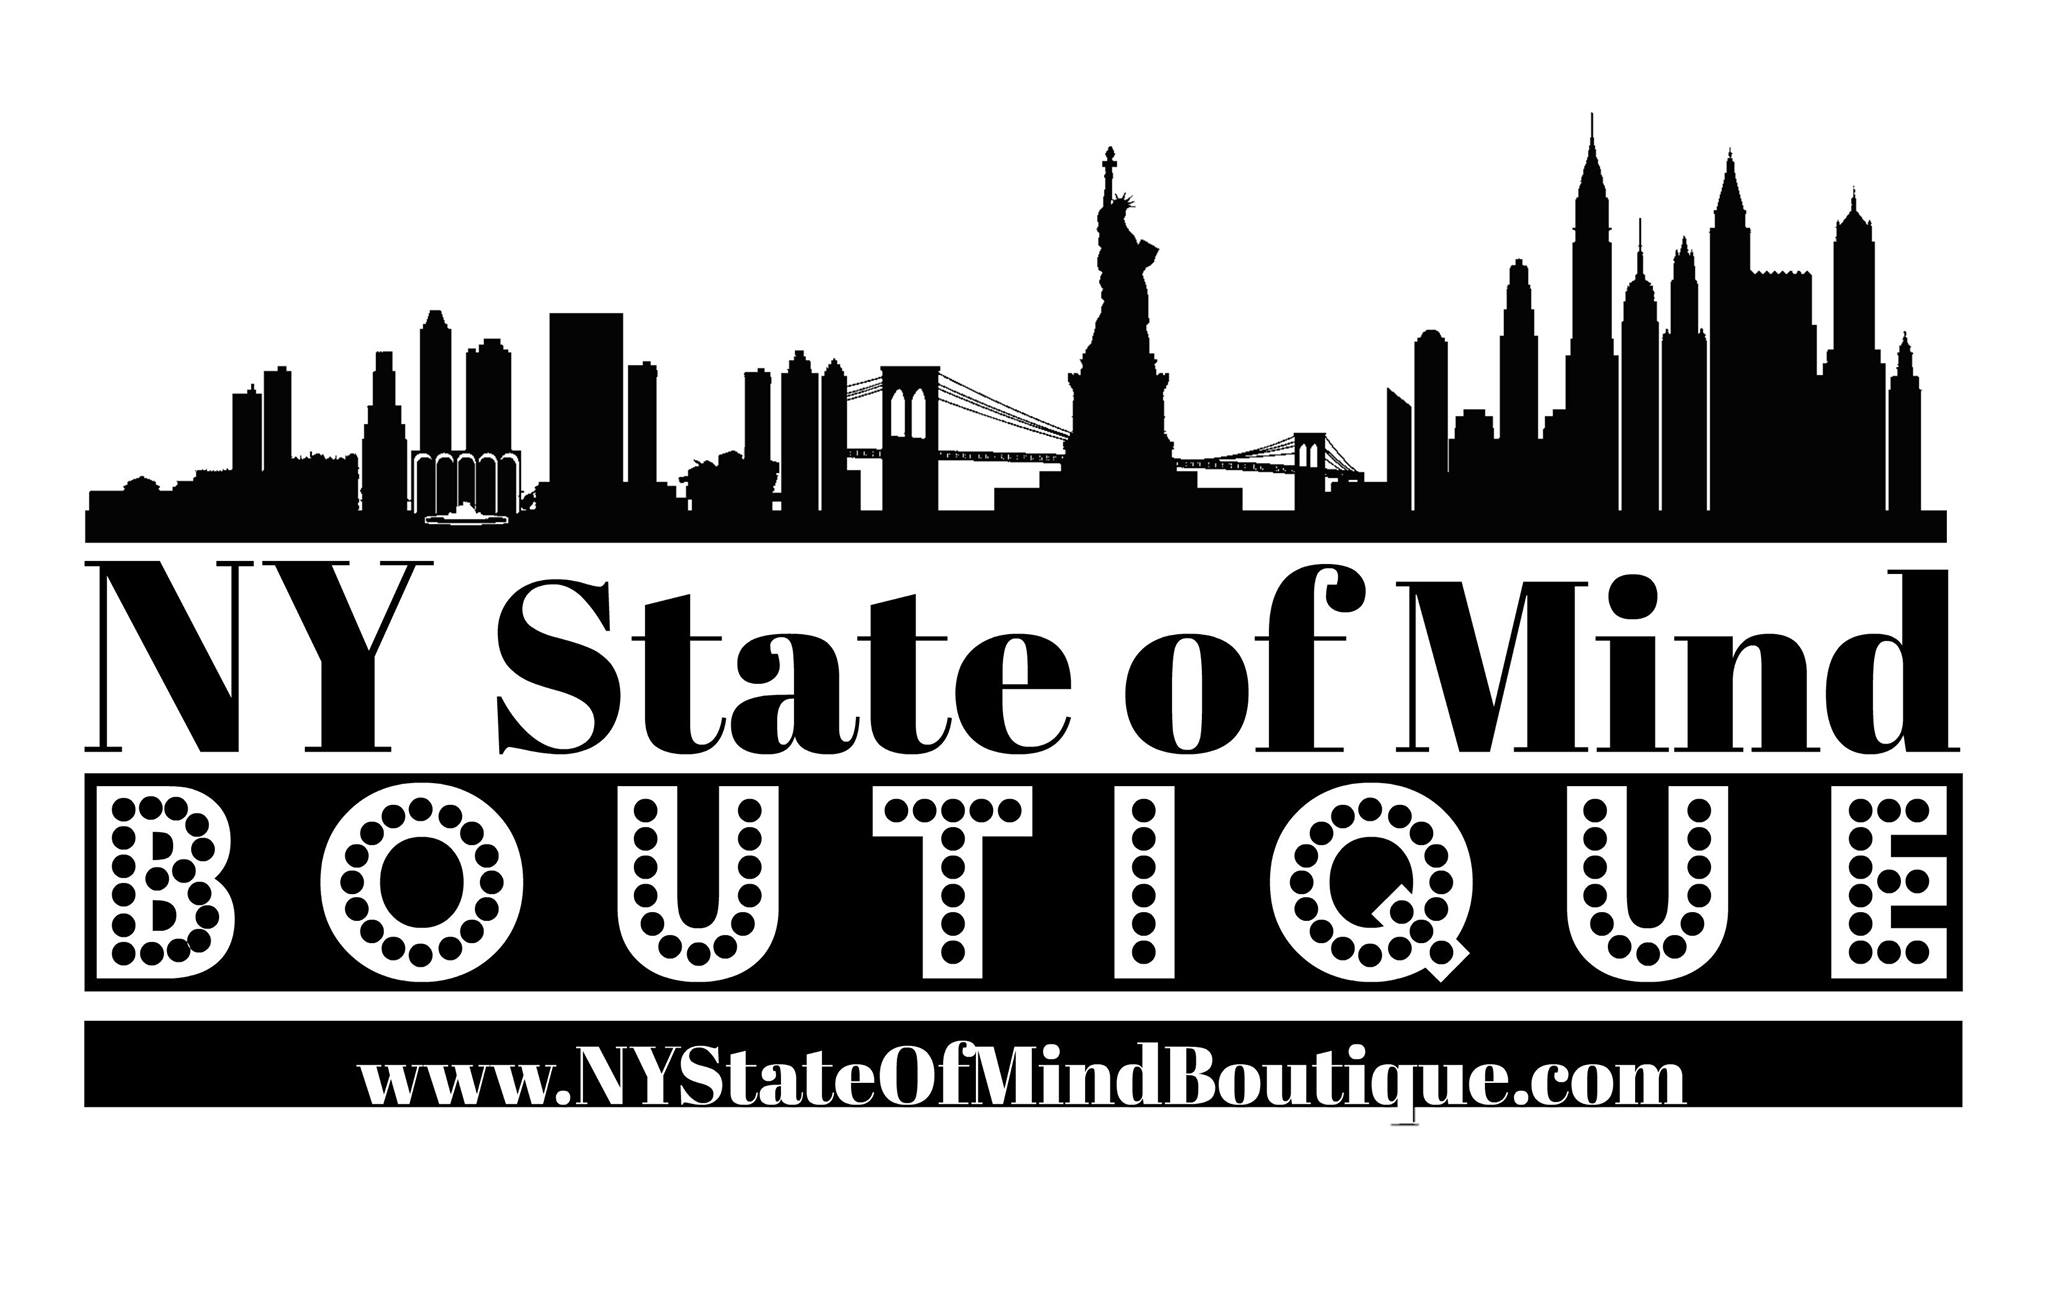 NY State of Mind Boutique